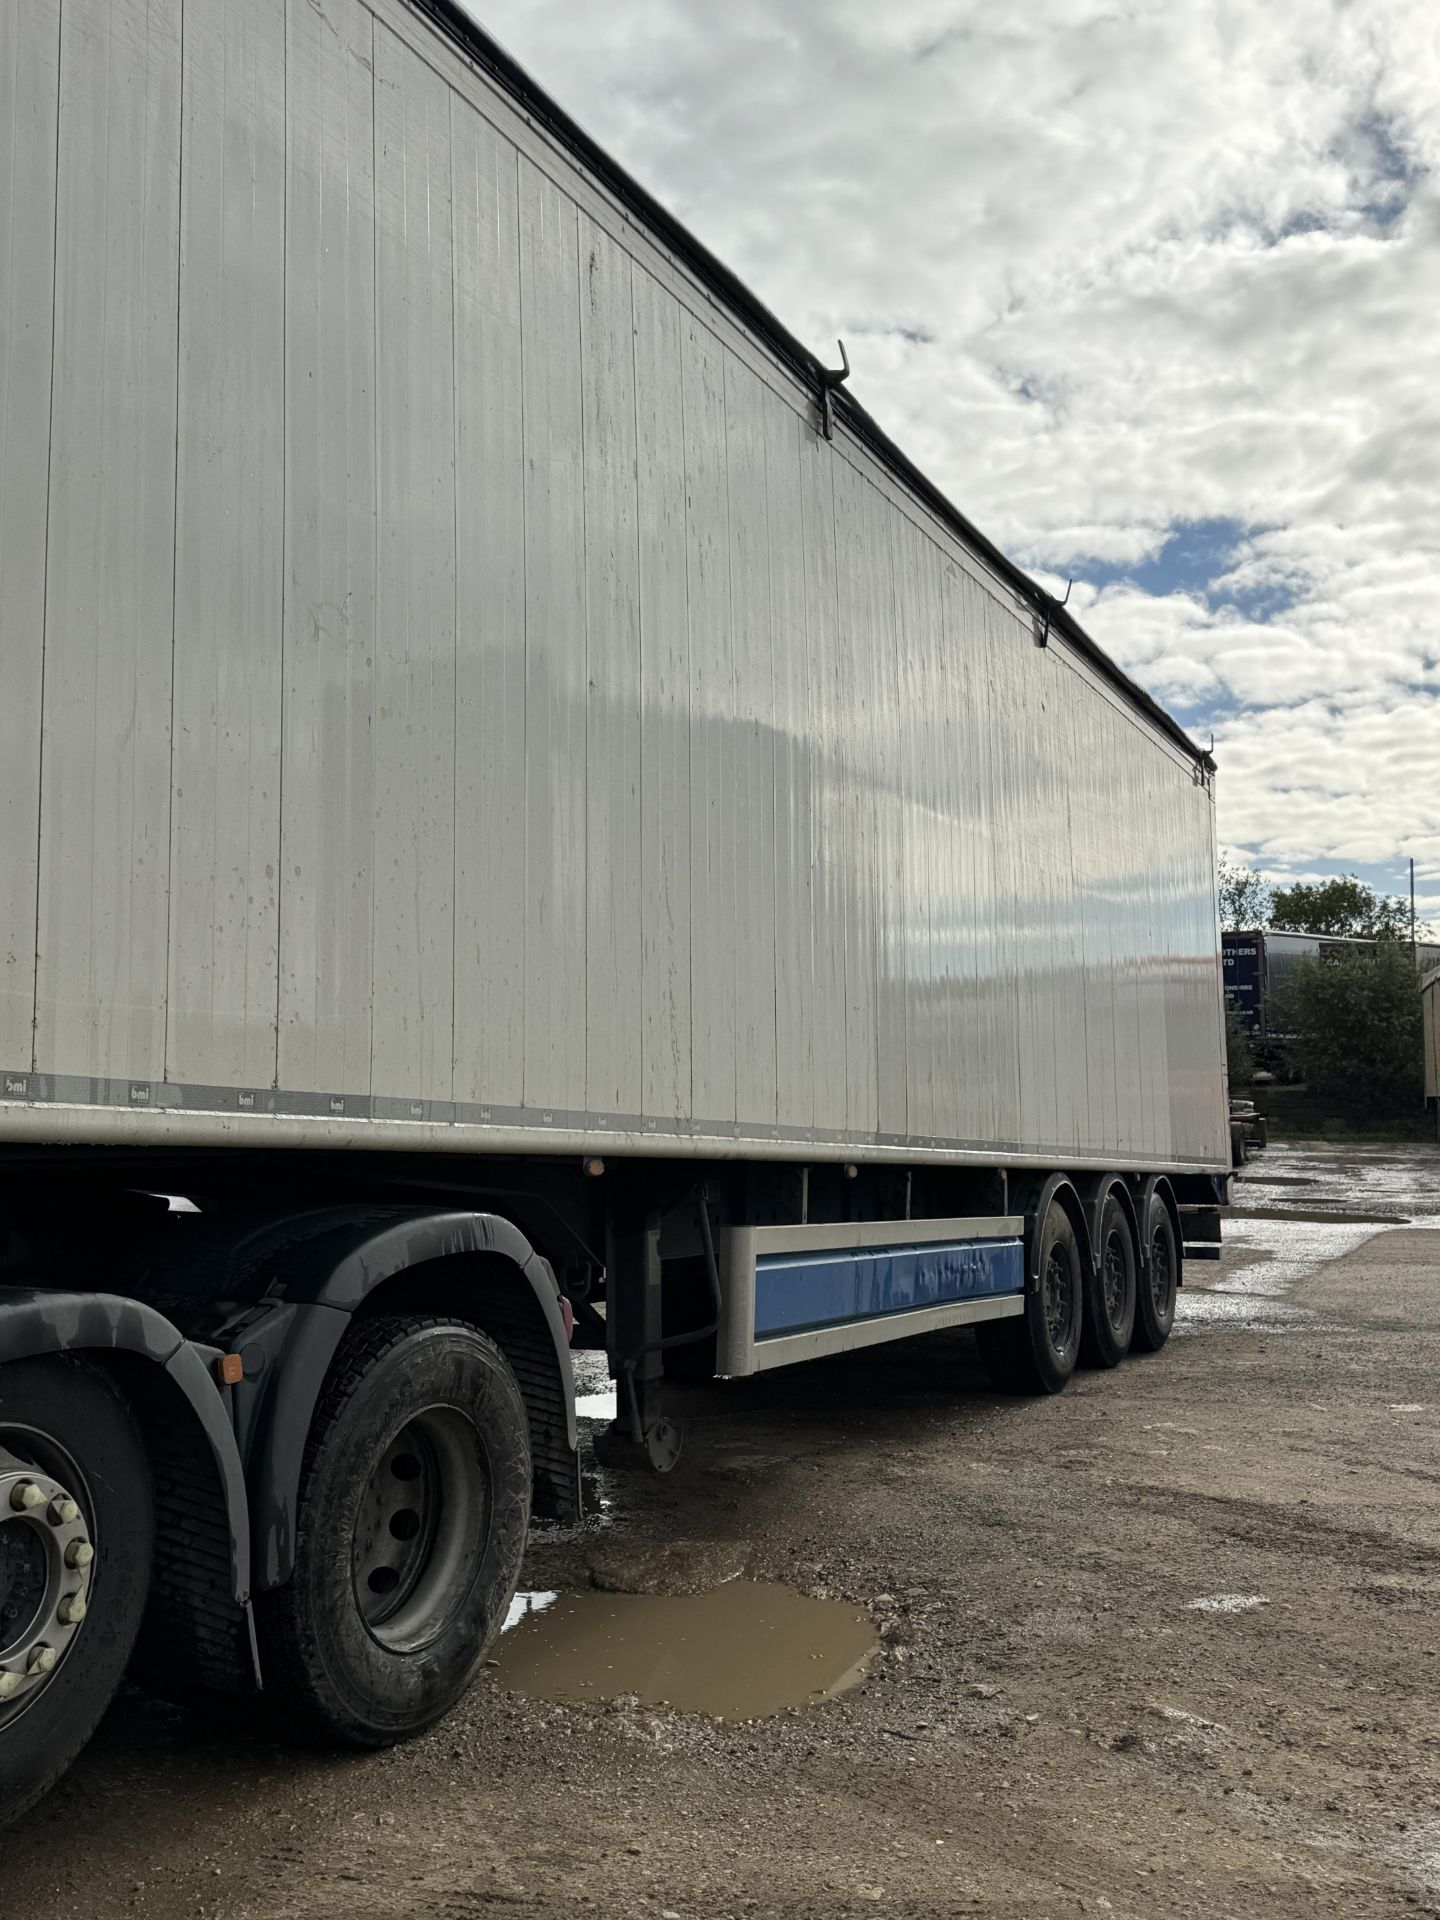 2017 - BMI Trailers Type AW 125, Tri Axle Air Suspension 125 Yard Cargo Floor Trailer - Image 13 of 46